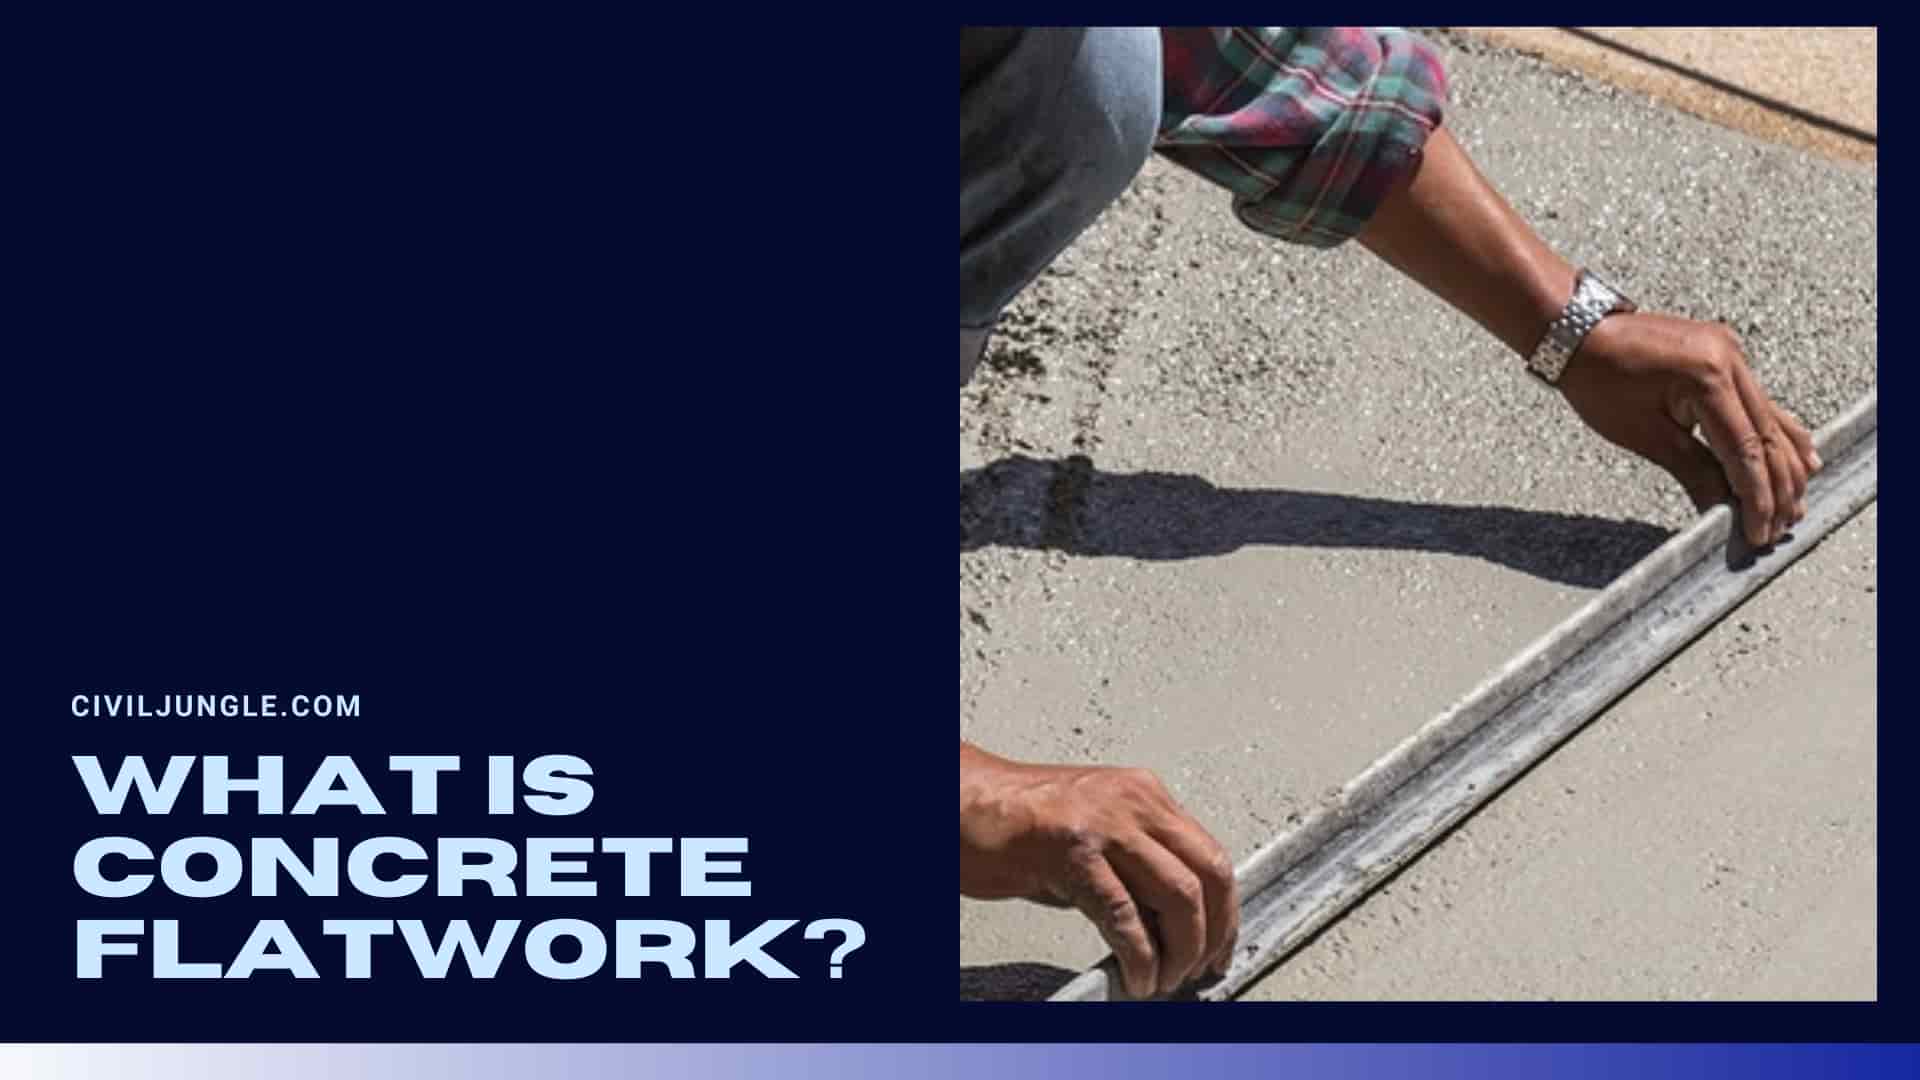 What Is Concrete Flatwork?